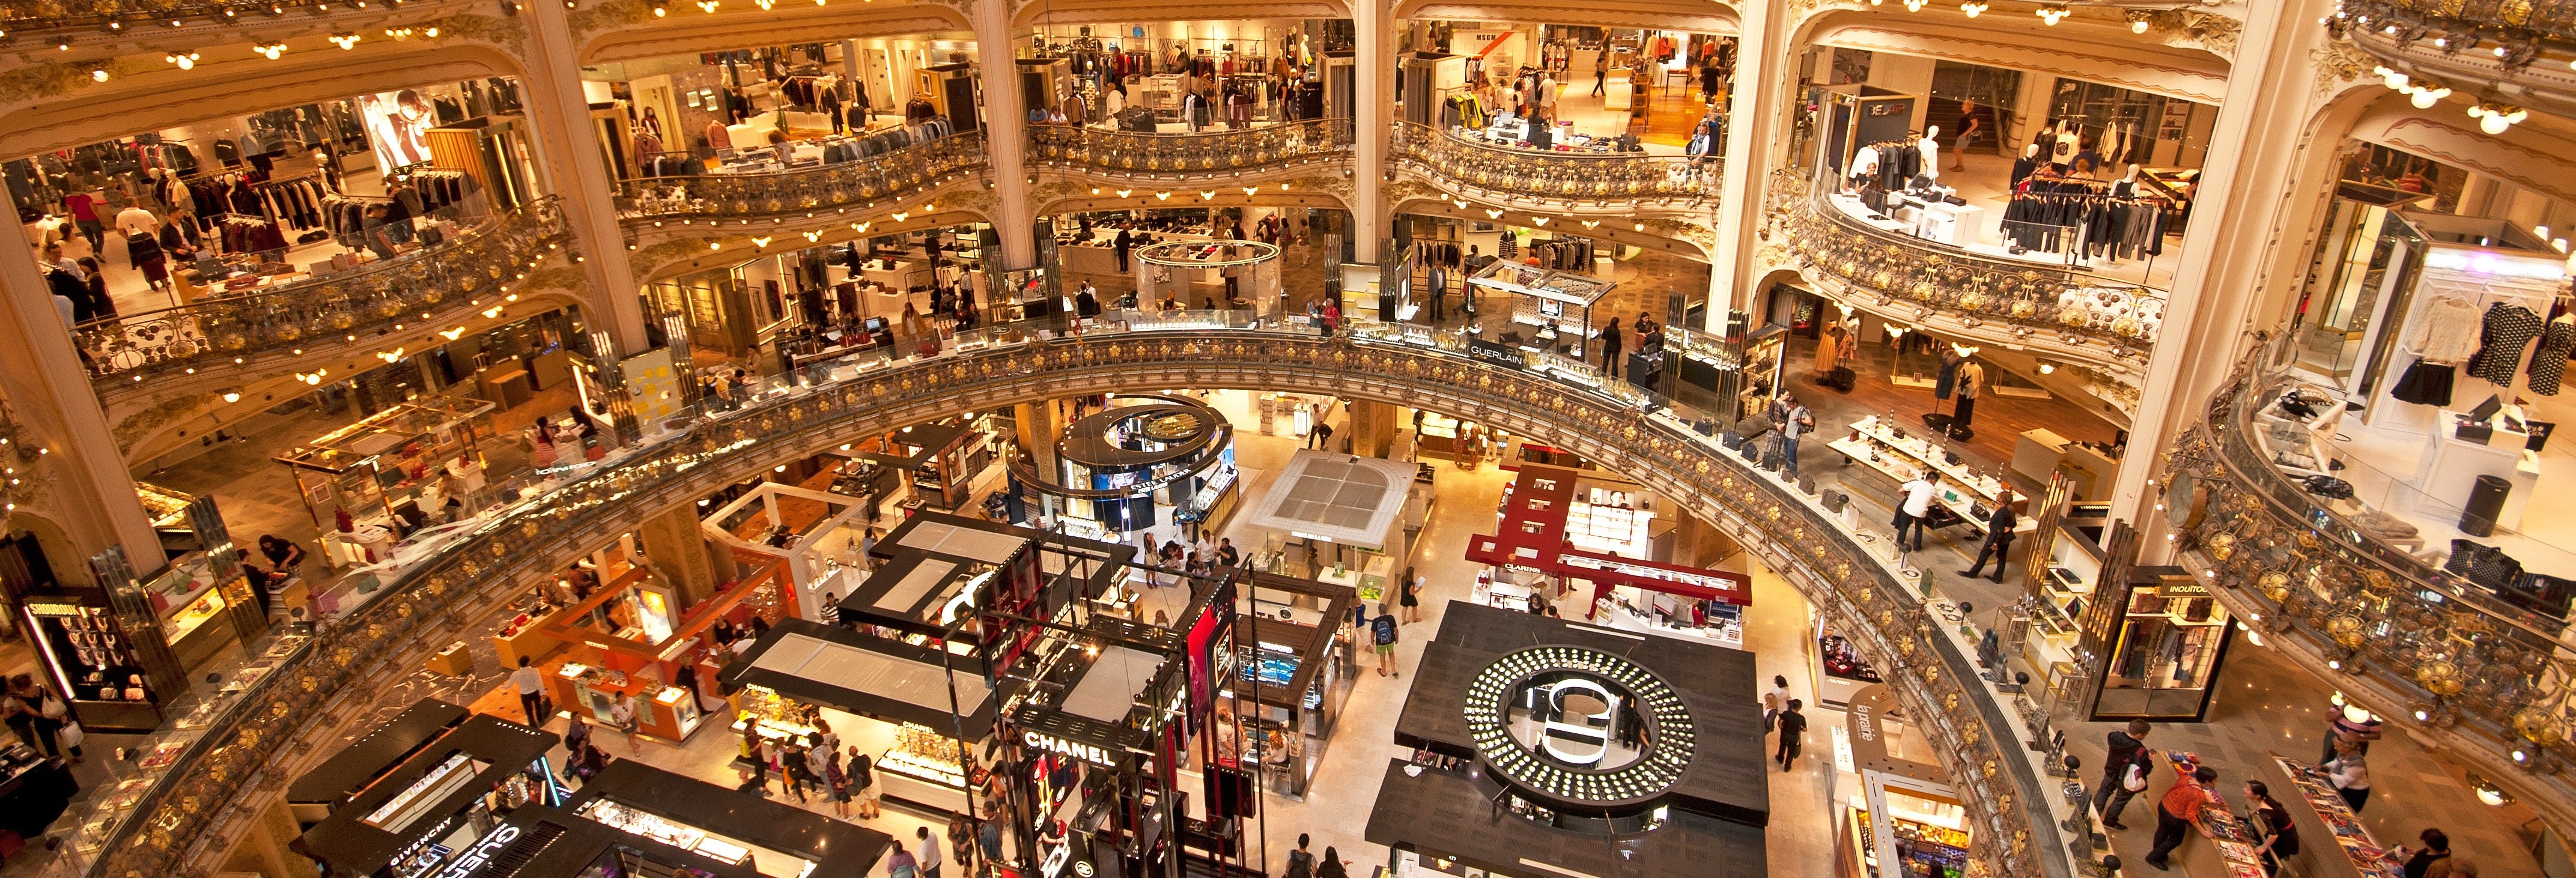 Galeries Lafayette Guided Tour